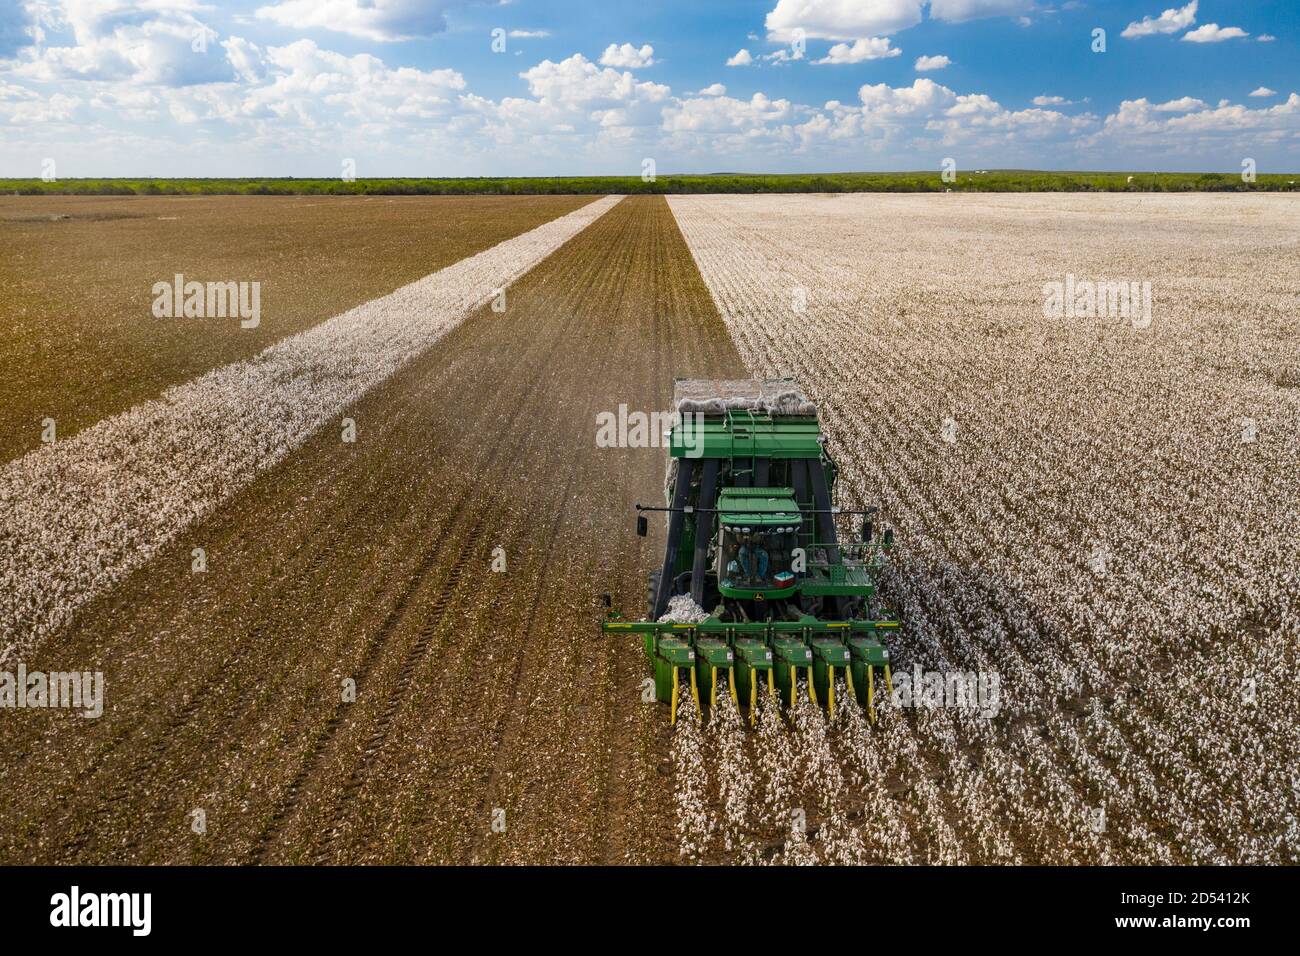 Operations Manager Brandon Schirmer operates a speciality cotton picking harvester at his family farm during the cotton harvest August 25, 2020 in Batesville, Texas. Stock Photo